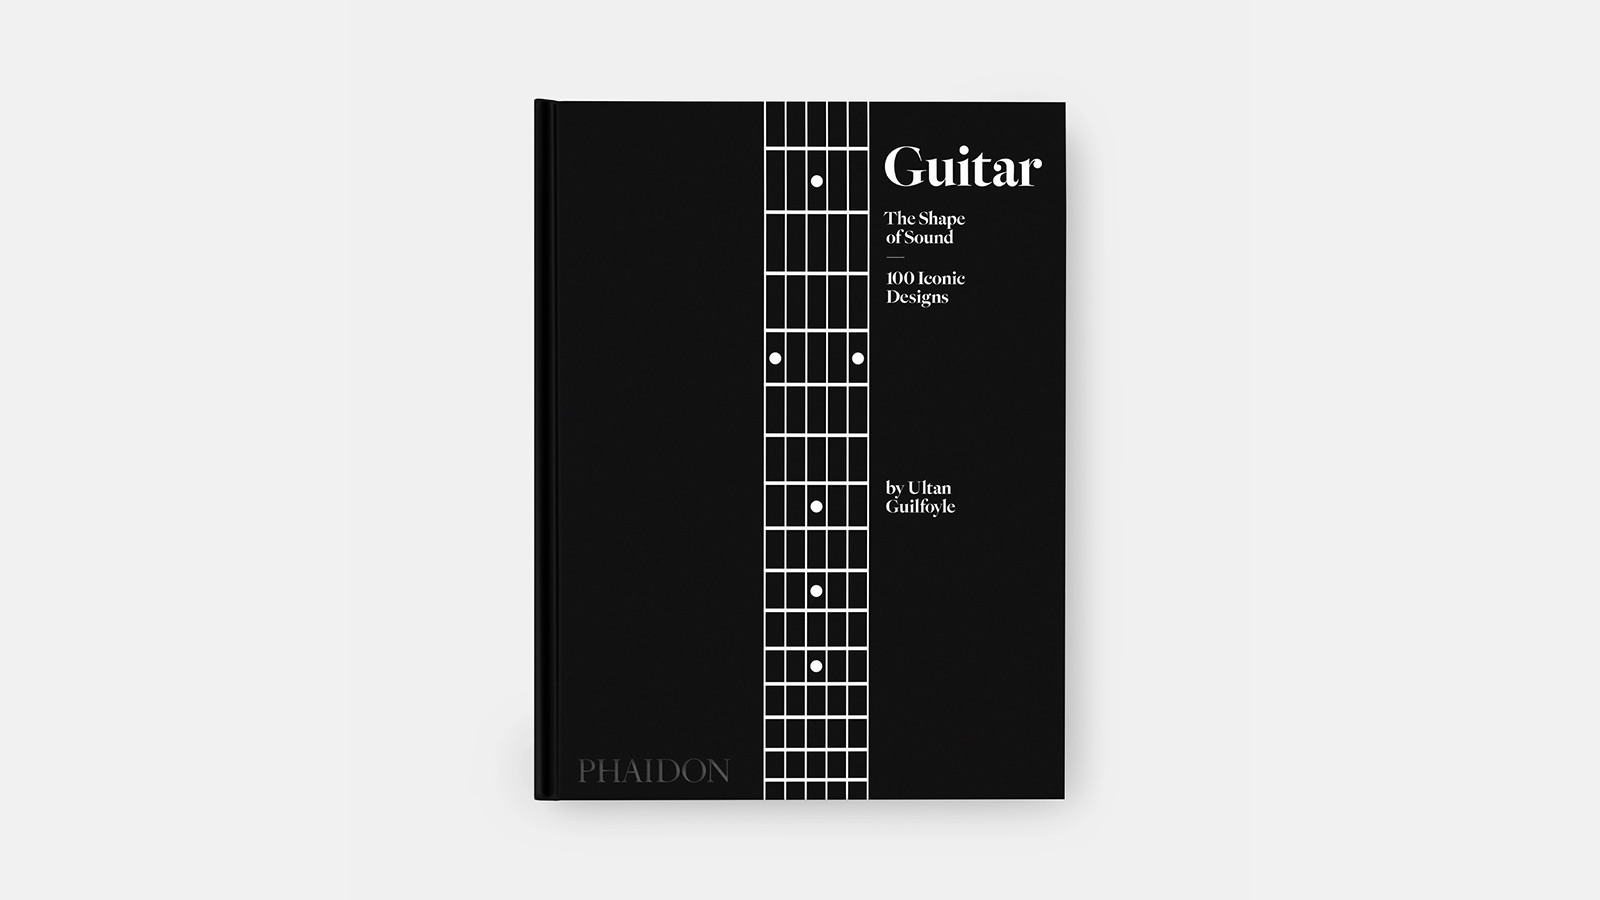 'Guitar: The Shape of Sound' by Ultan Guilfoyle